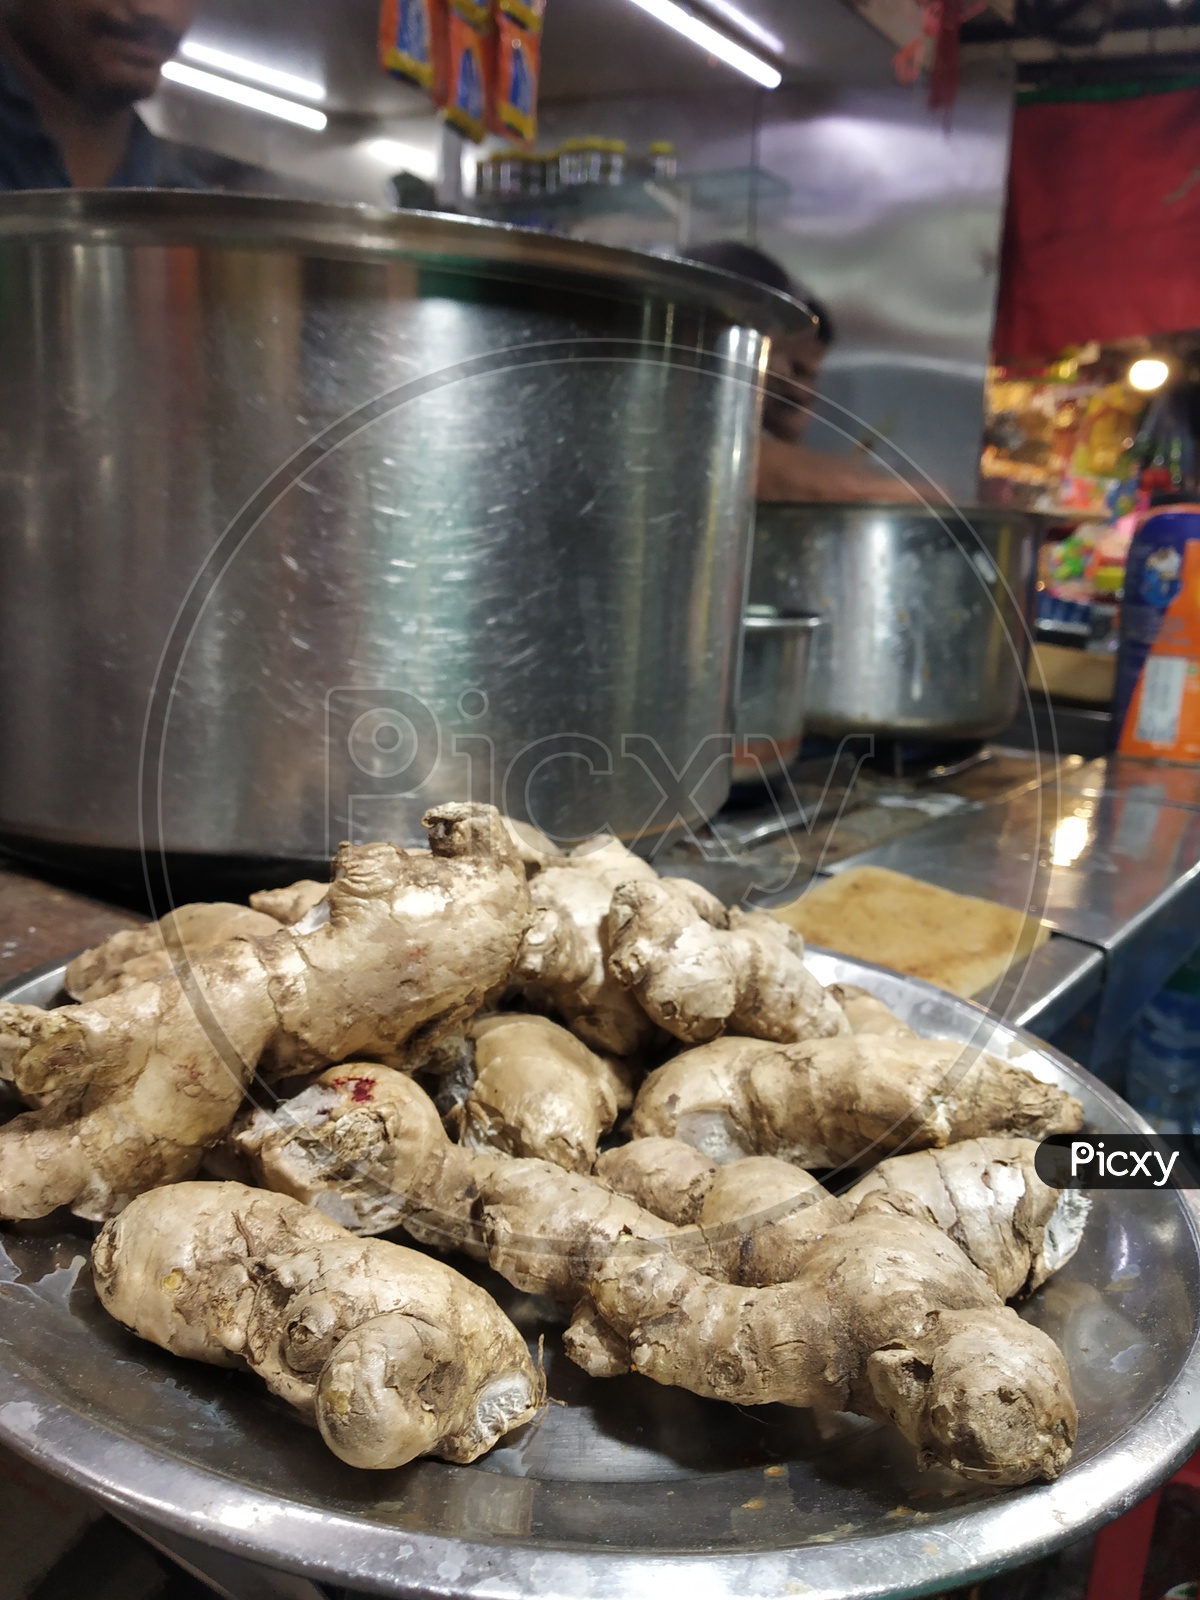 Ginger on Plate At a Tea Vendor Stall